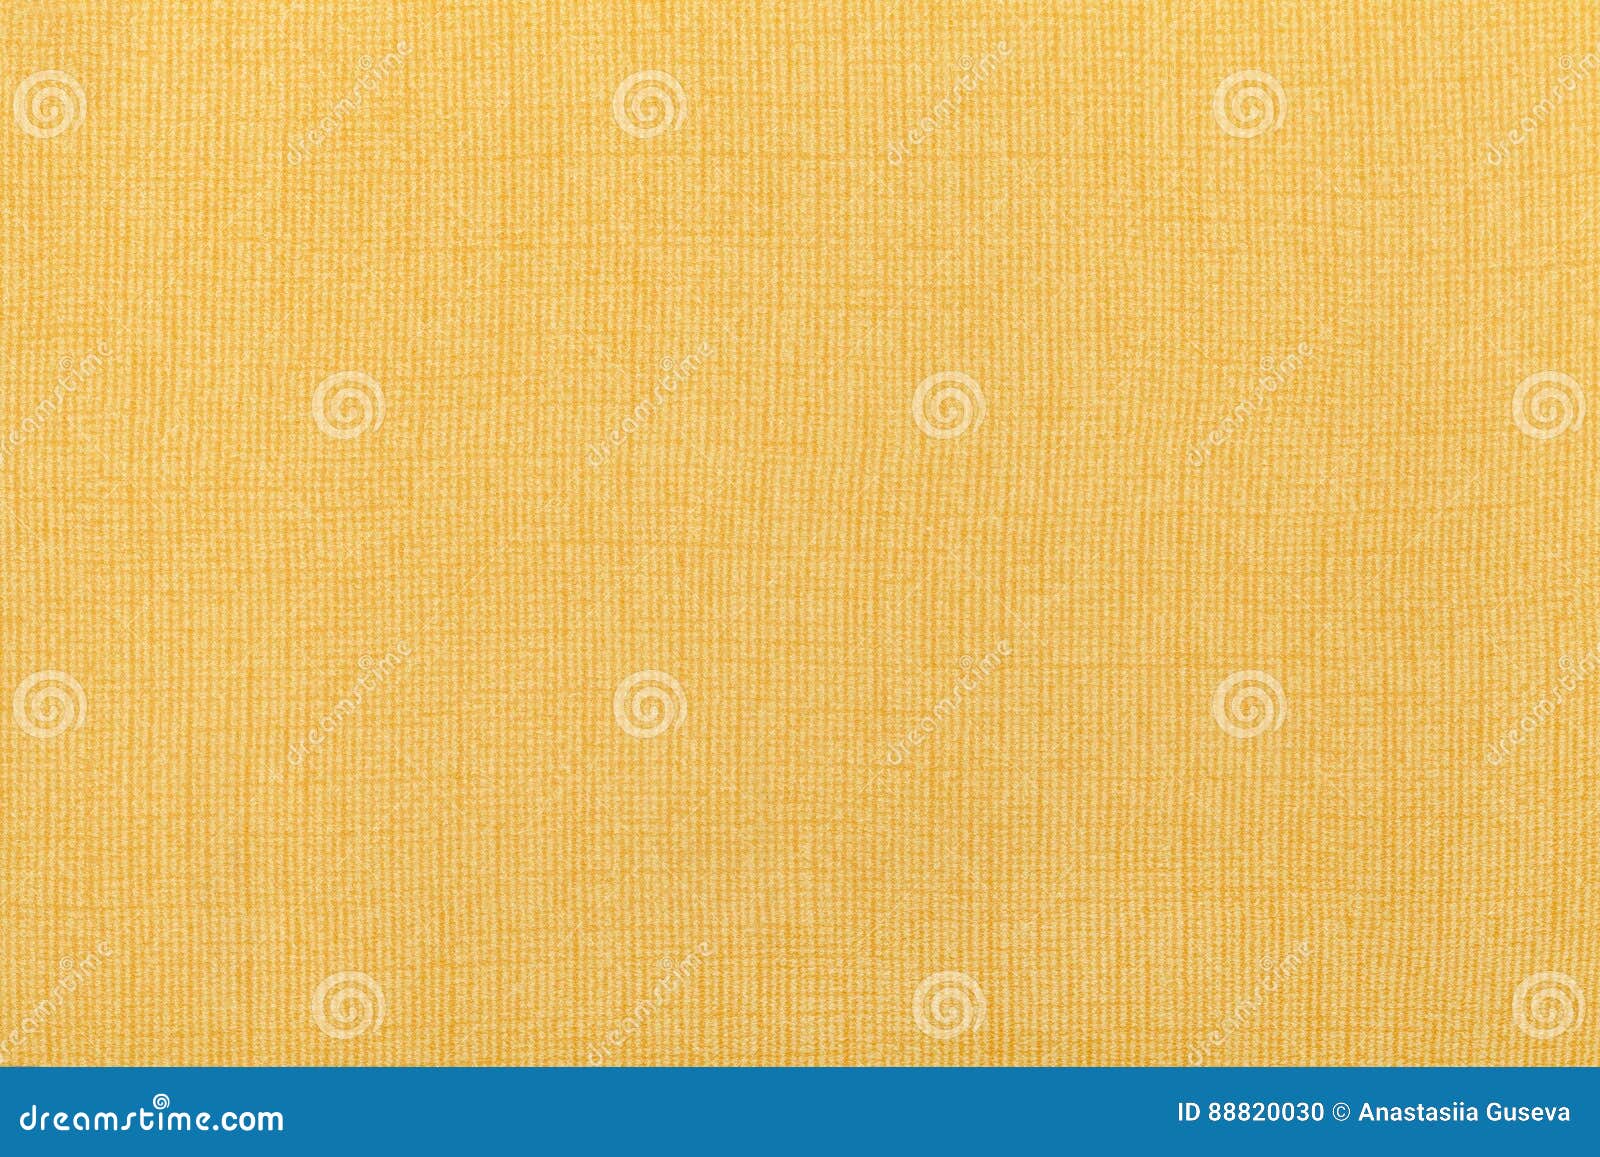 Light Yellow Ocher Background From A Textile Material. Fabric With ...